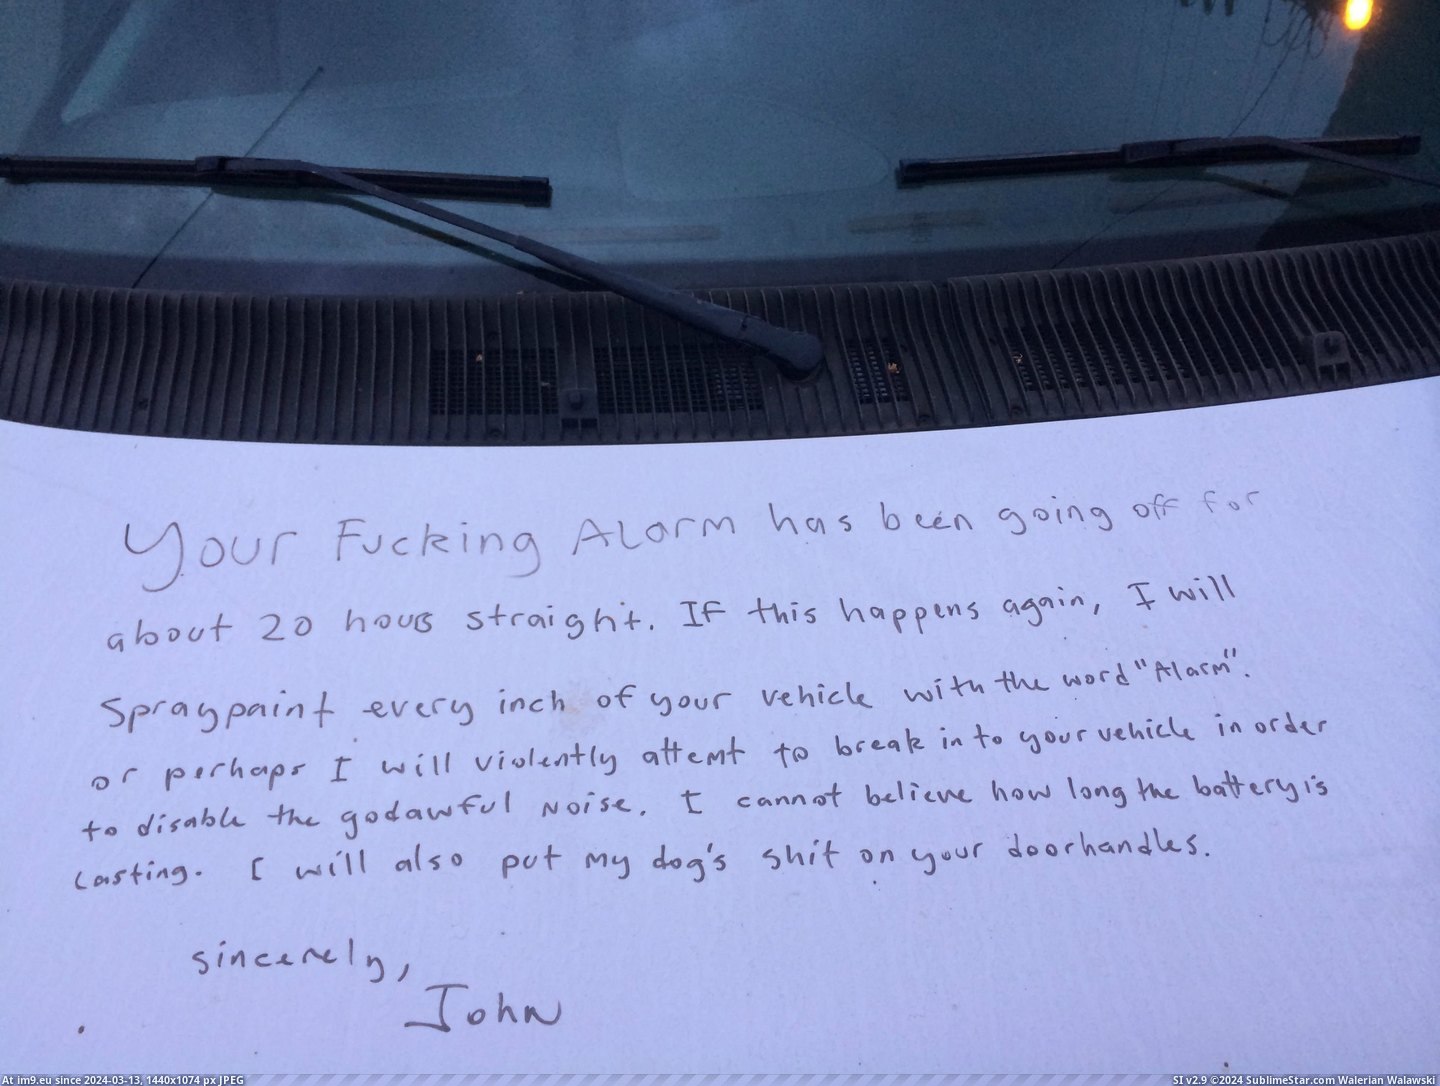 #Funny #Friend #Van #Shift #Overnight #Marker #Permanent #Find #Message #Written [Funny] My friend came back from an overnight shift to find this message written in permanent marker on his van. Pic. (Image of album My r/FUNNY favs))